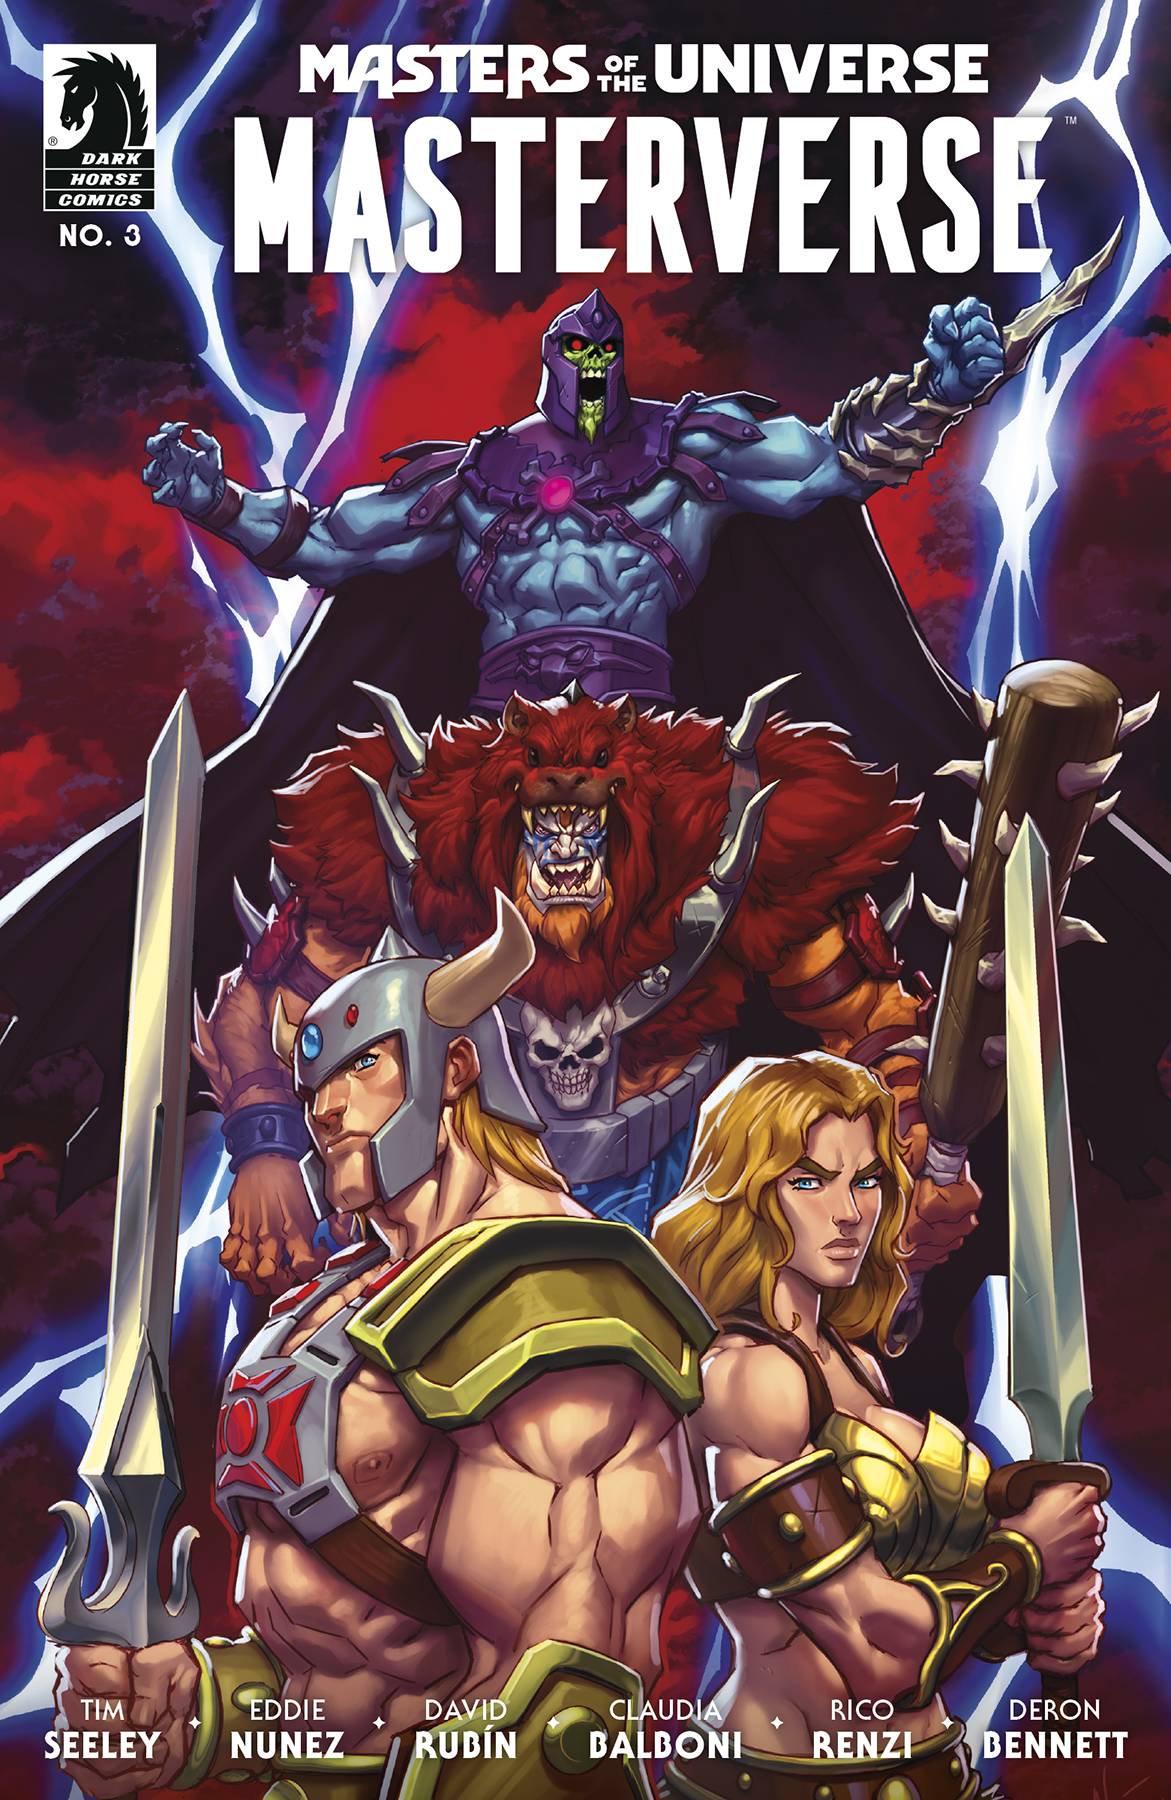 MASTERS OF UNIVERSE MASTERVERSE #3 (OF 4)